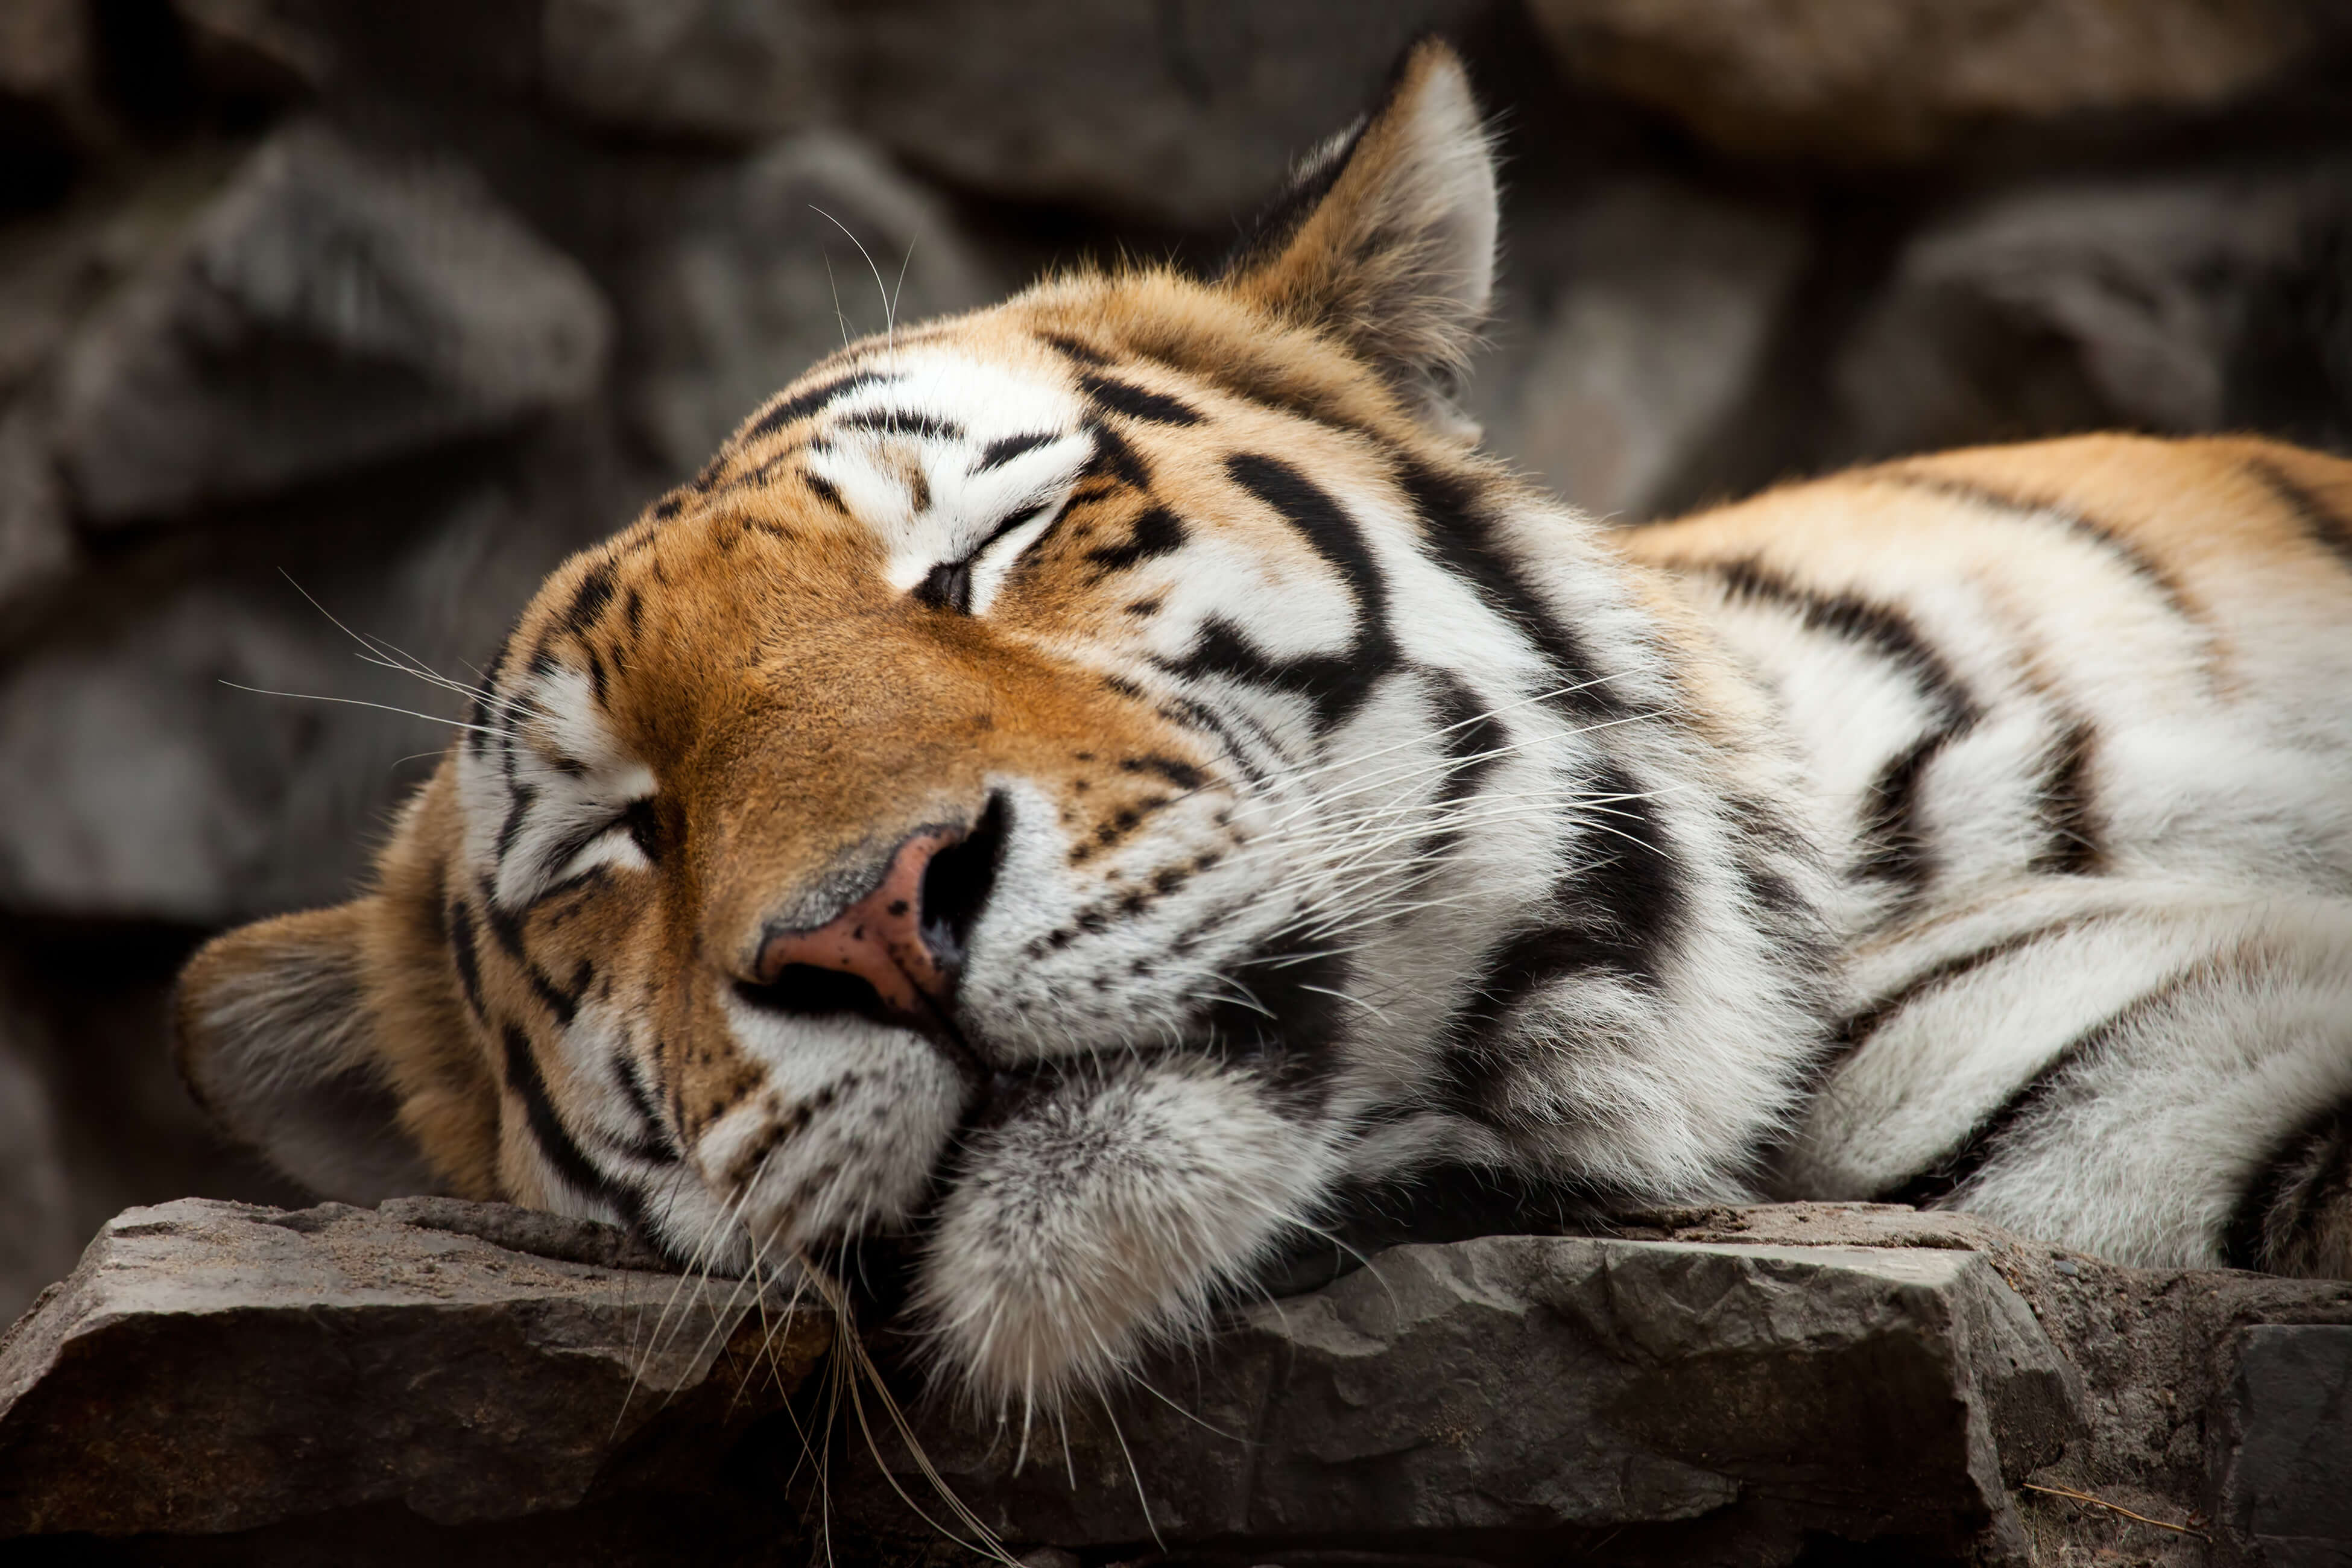 An adult tiger sleeping on some rocks